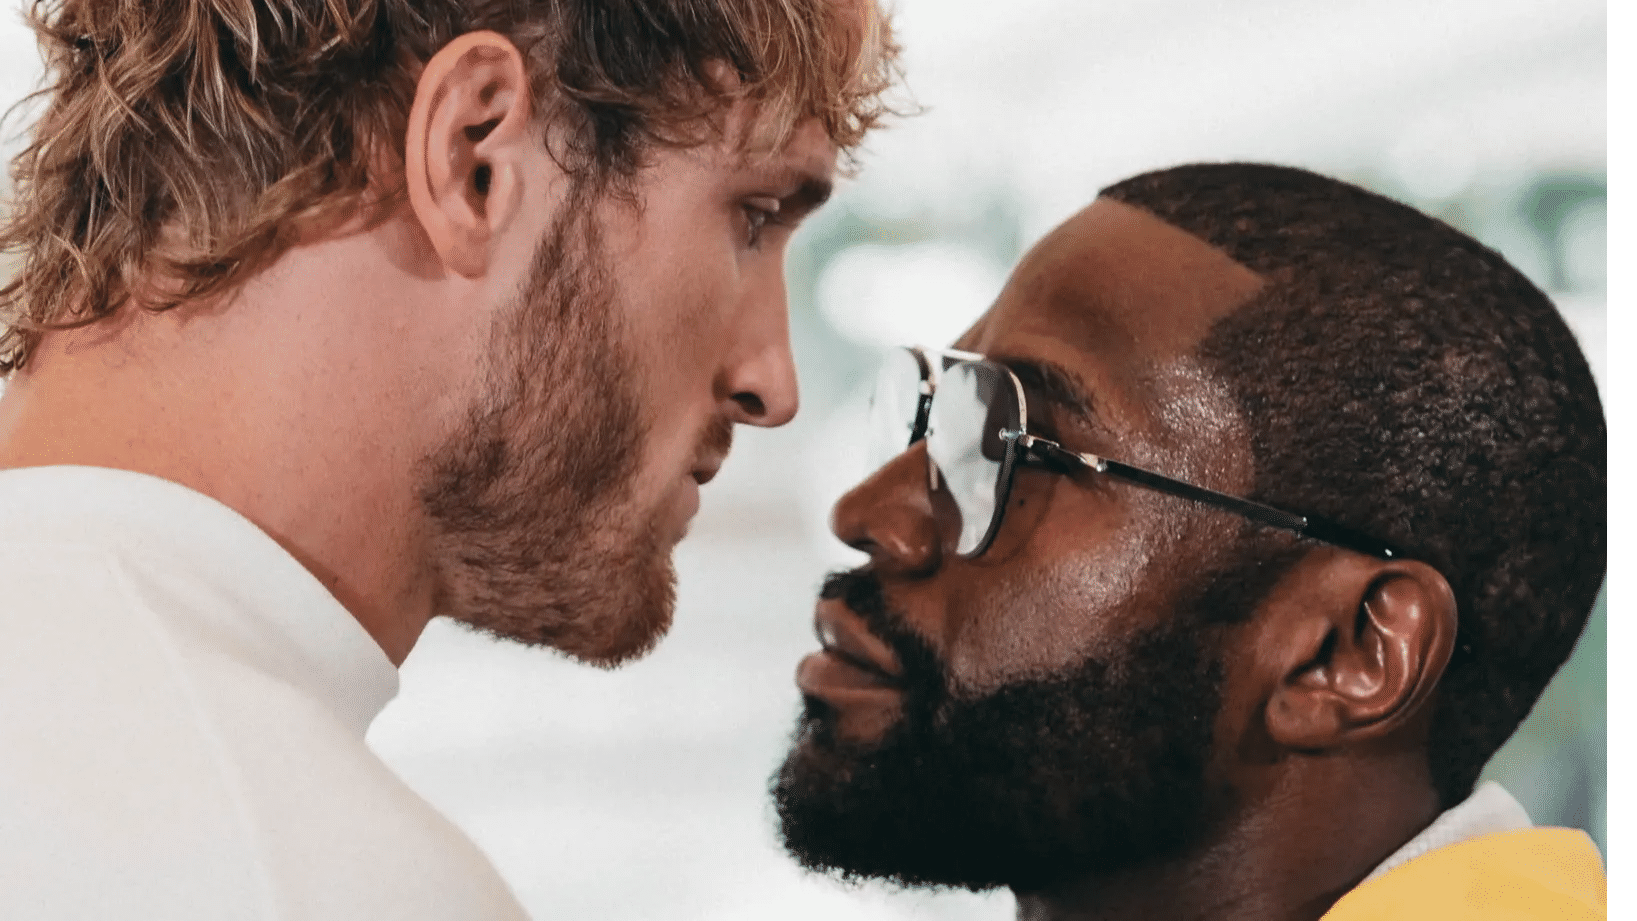 Floyd Mayweather vs Logan Paul exhibition boxing match ends without a knockout